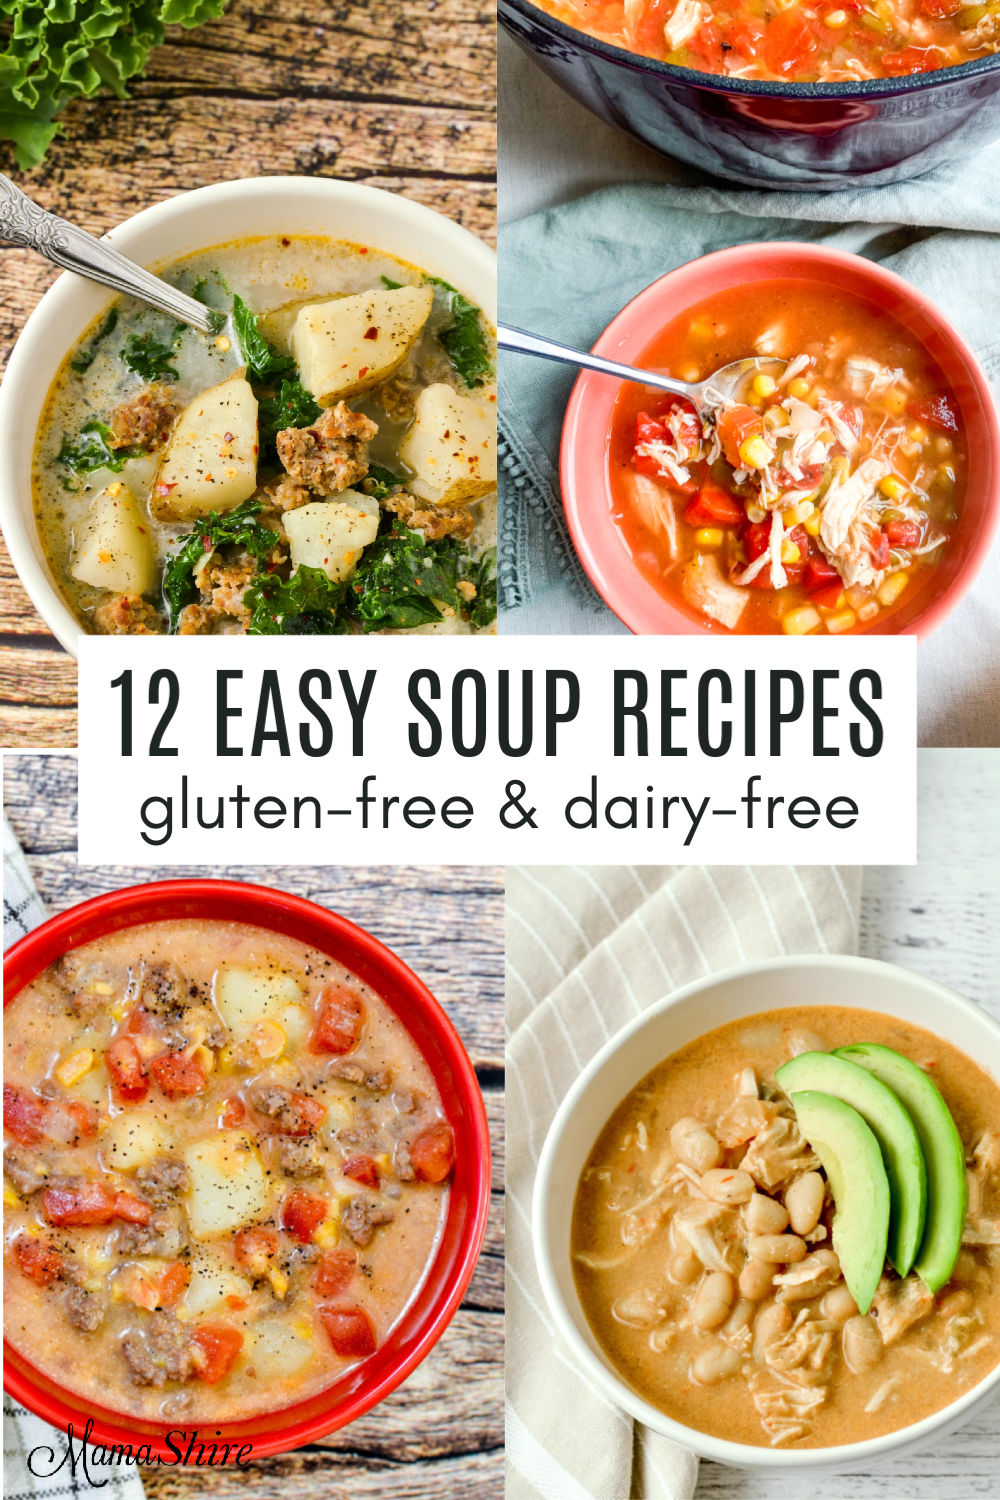 12 Easy Gluten-Free soup recipes that are also dairy-free.